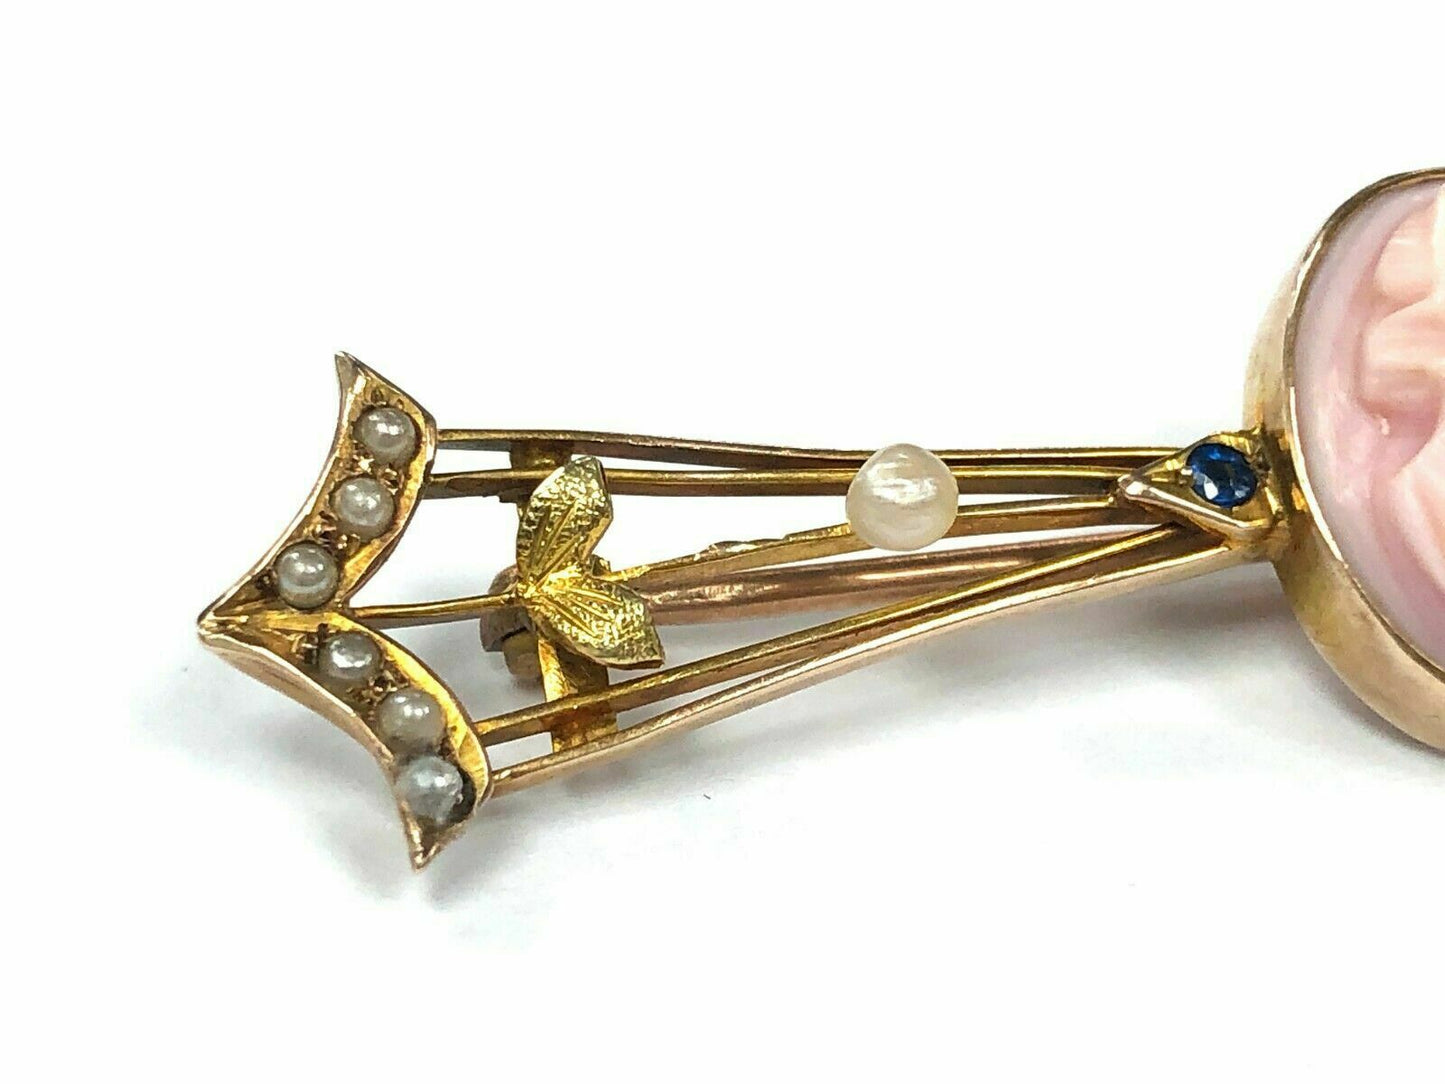 Art Nouveau Era Conch Shell Cameo, Sapphire & Seed Pearl Brooch in 10K Gold